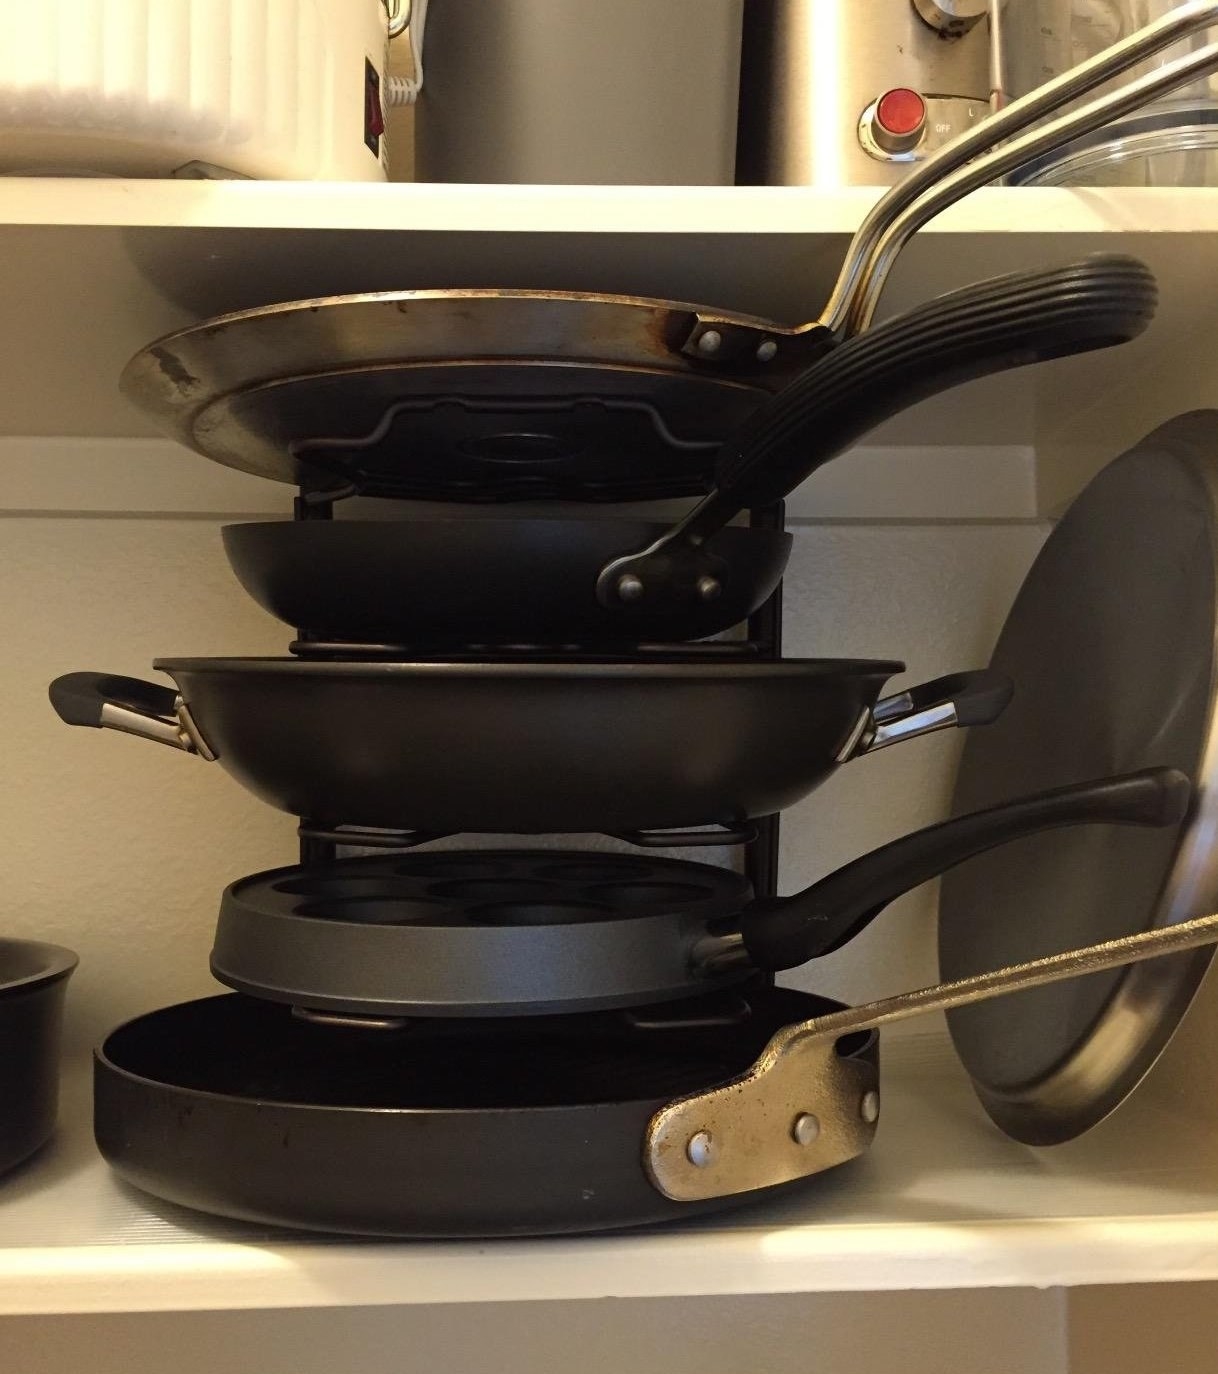 vertical rack for cooking pots and pans filled with variously sized pans